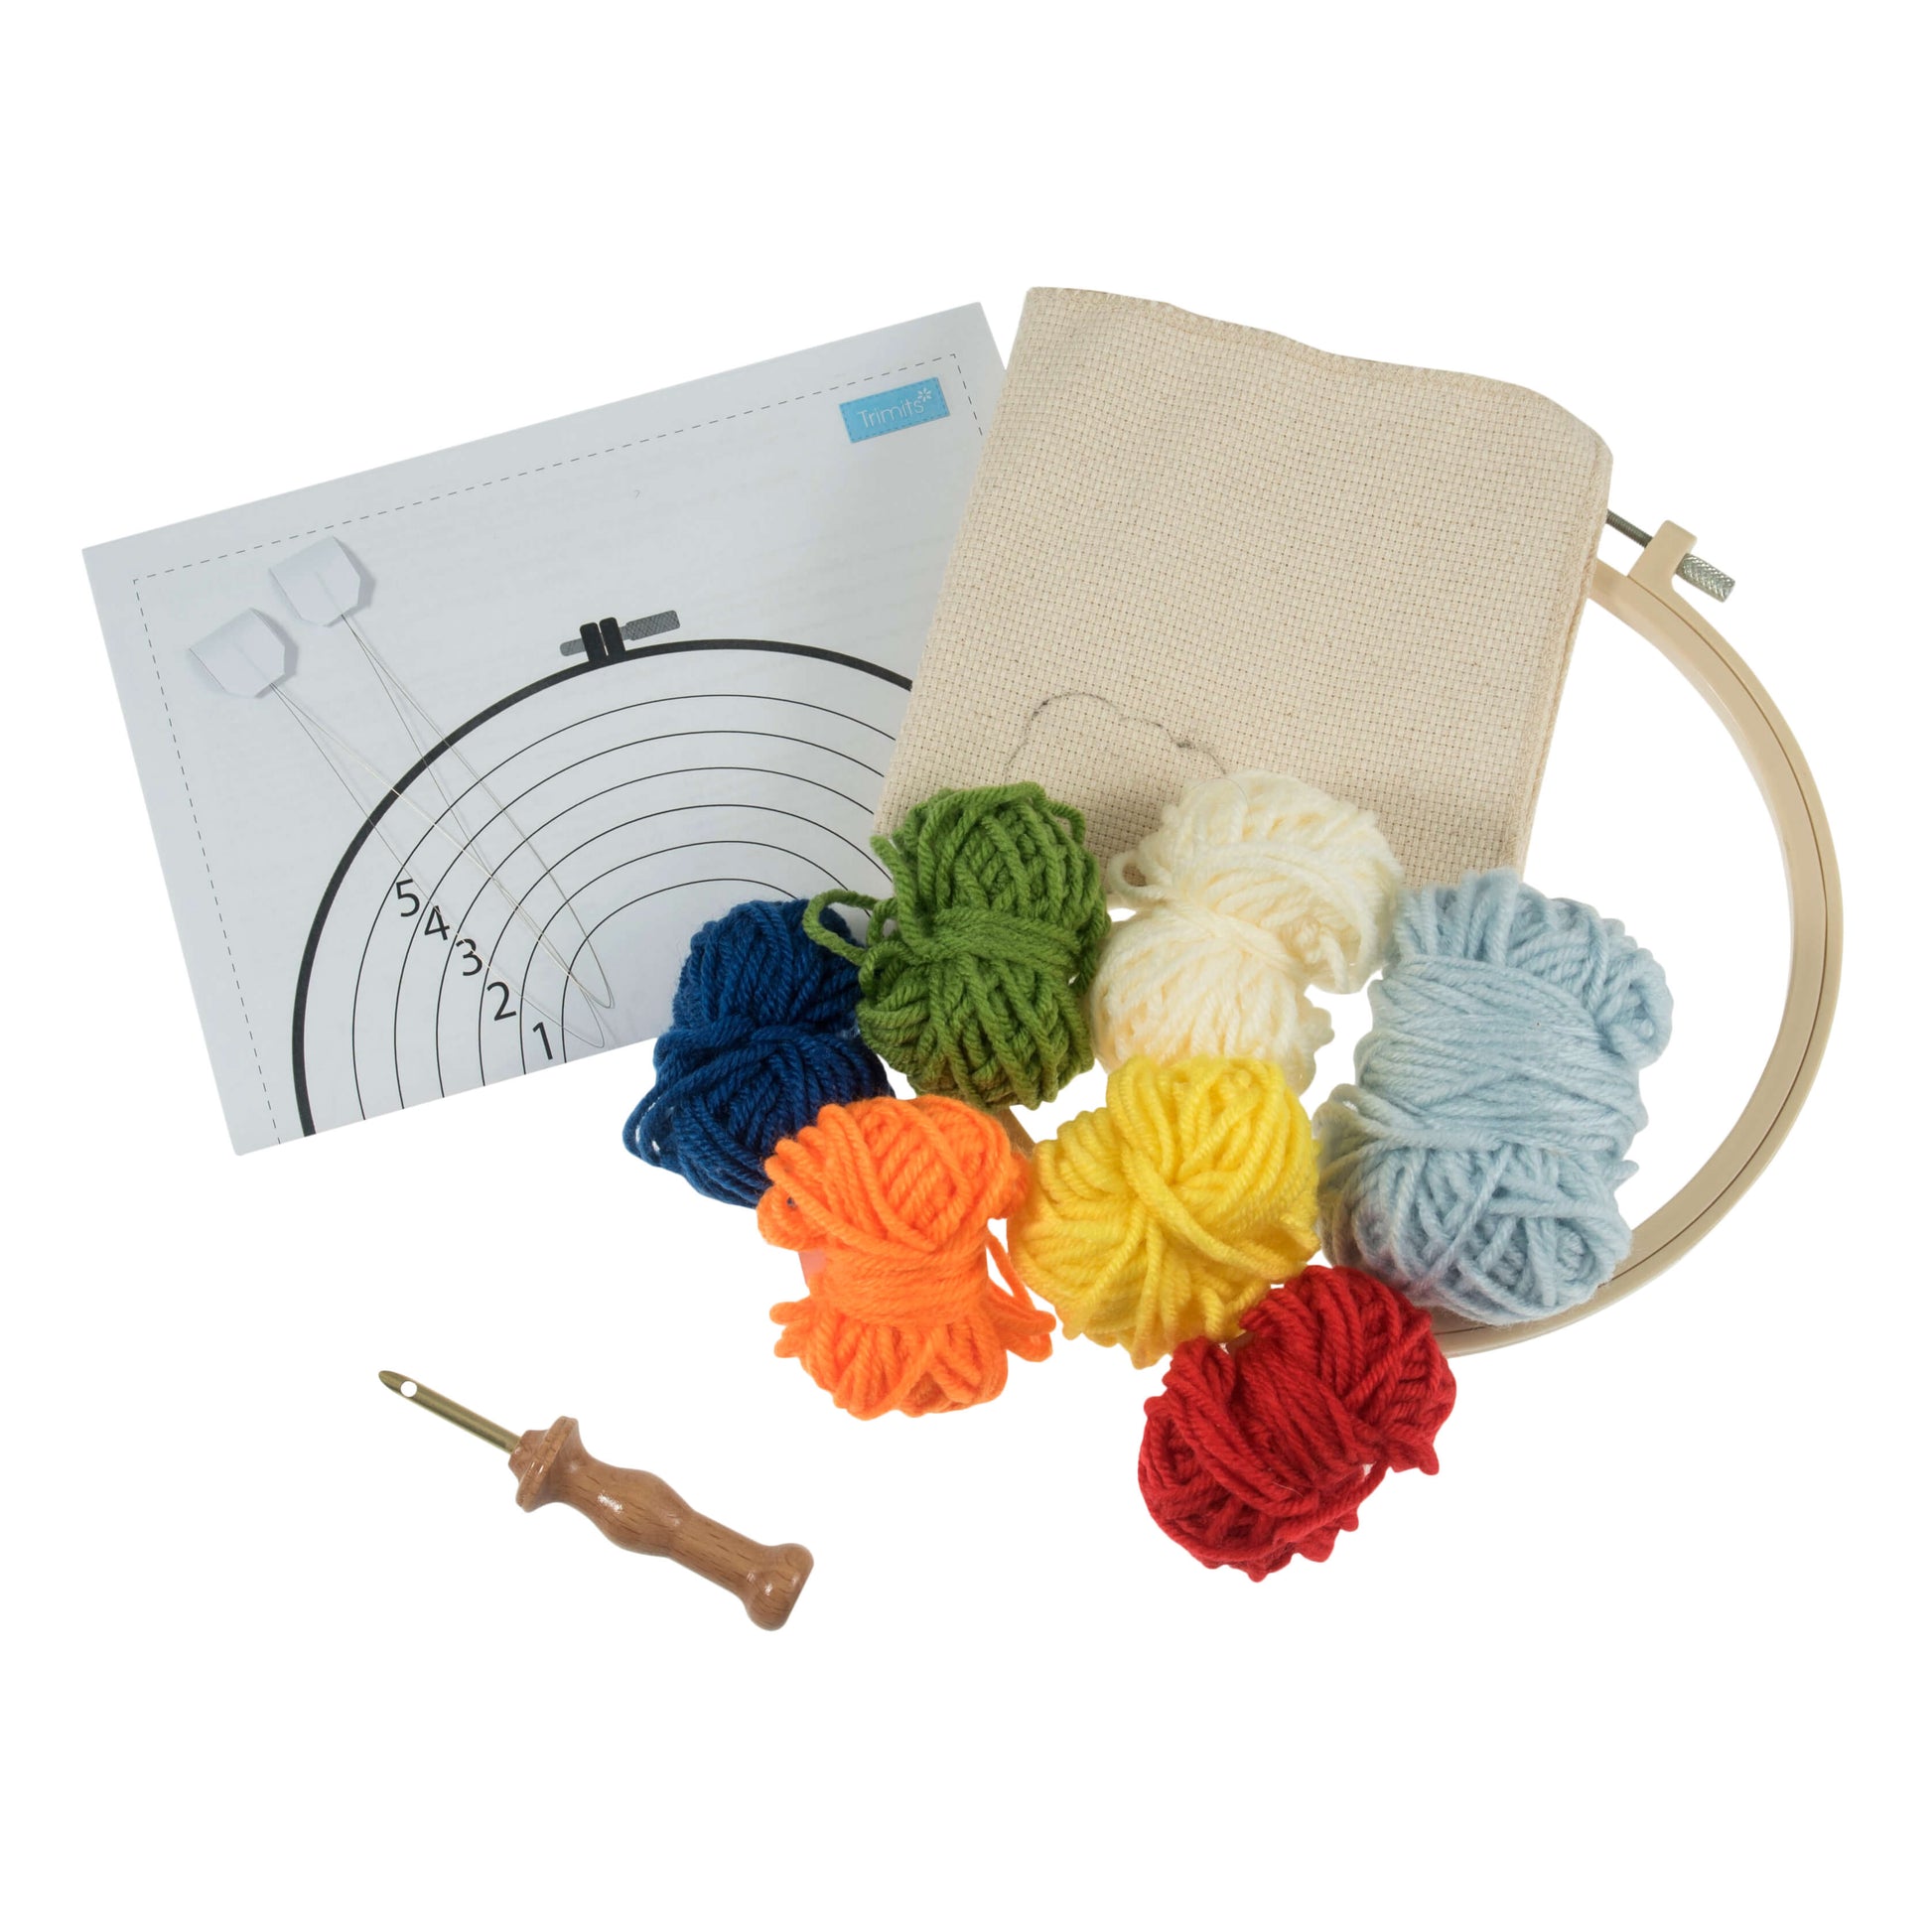 A wooden embroidery hoop, a wooden needle, and a bag of yarn on a white background.